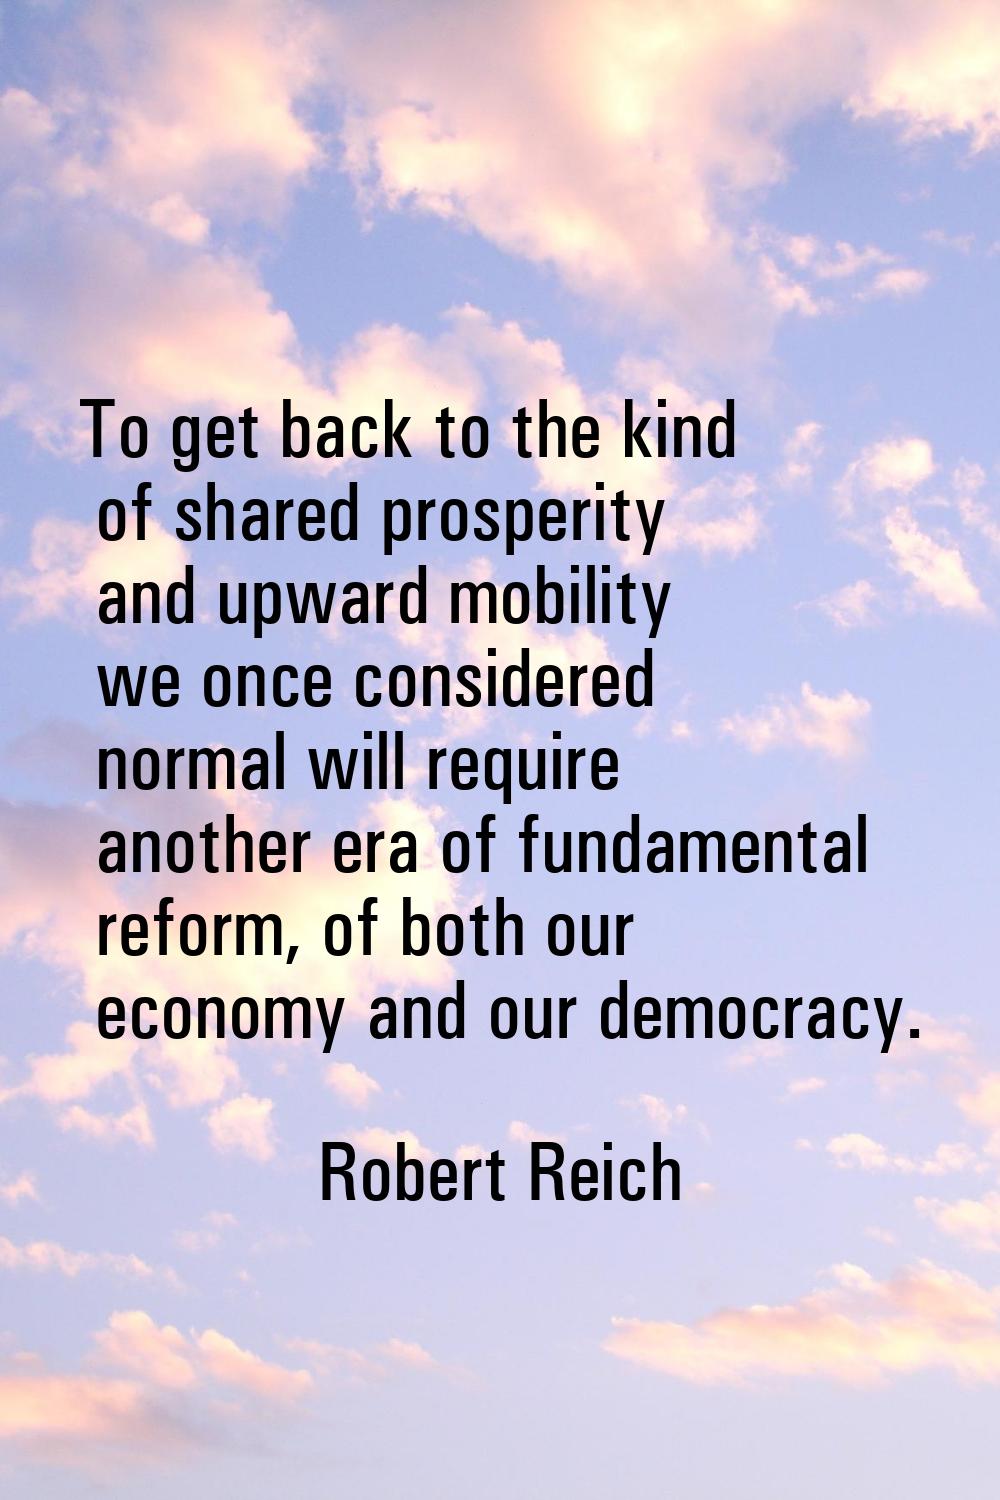 To get back to the kind of shared prosperity and upward mobility we once considered normal will req